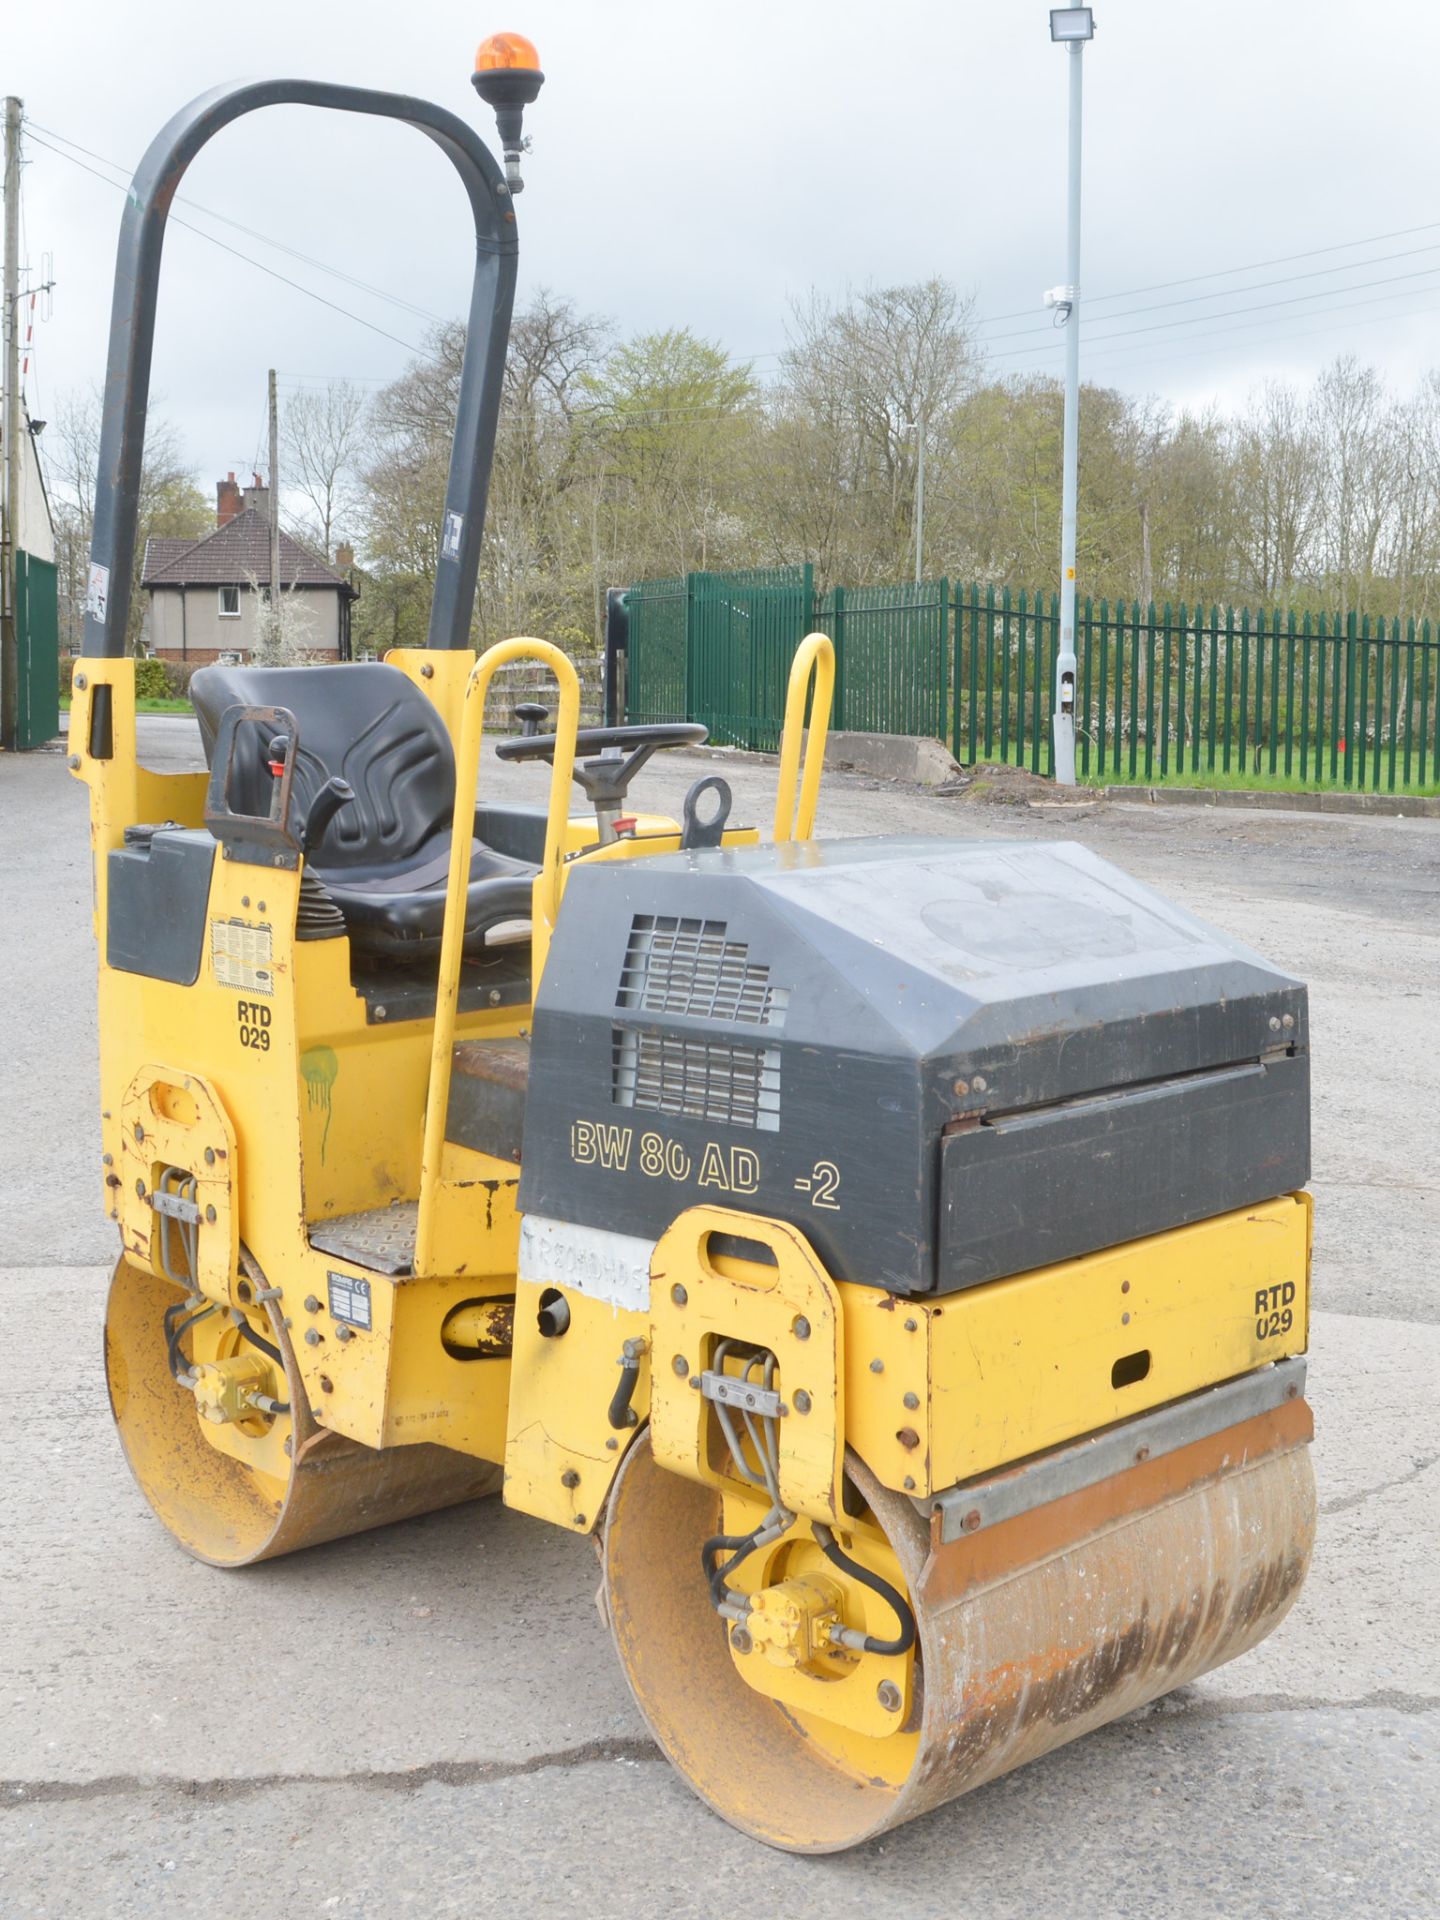 Bomag BW80AD-2 double drum ride on roller  Year: 2006 S/N: 426052 Recorded hours: 869 RTD029 - Image 2 of 7